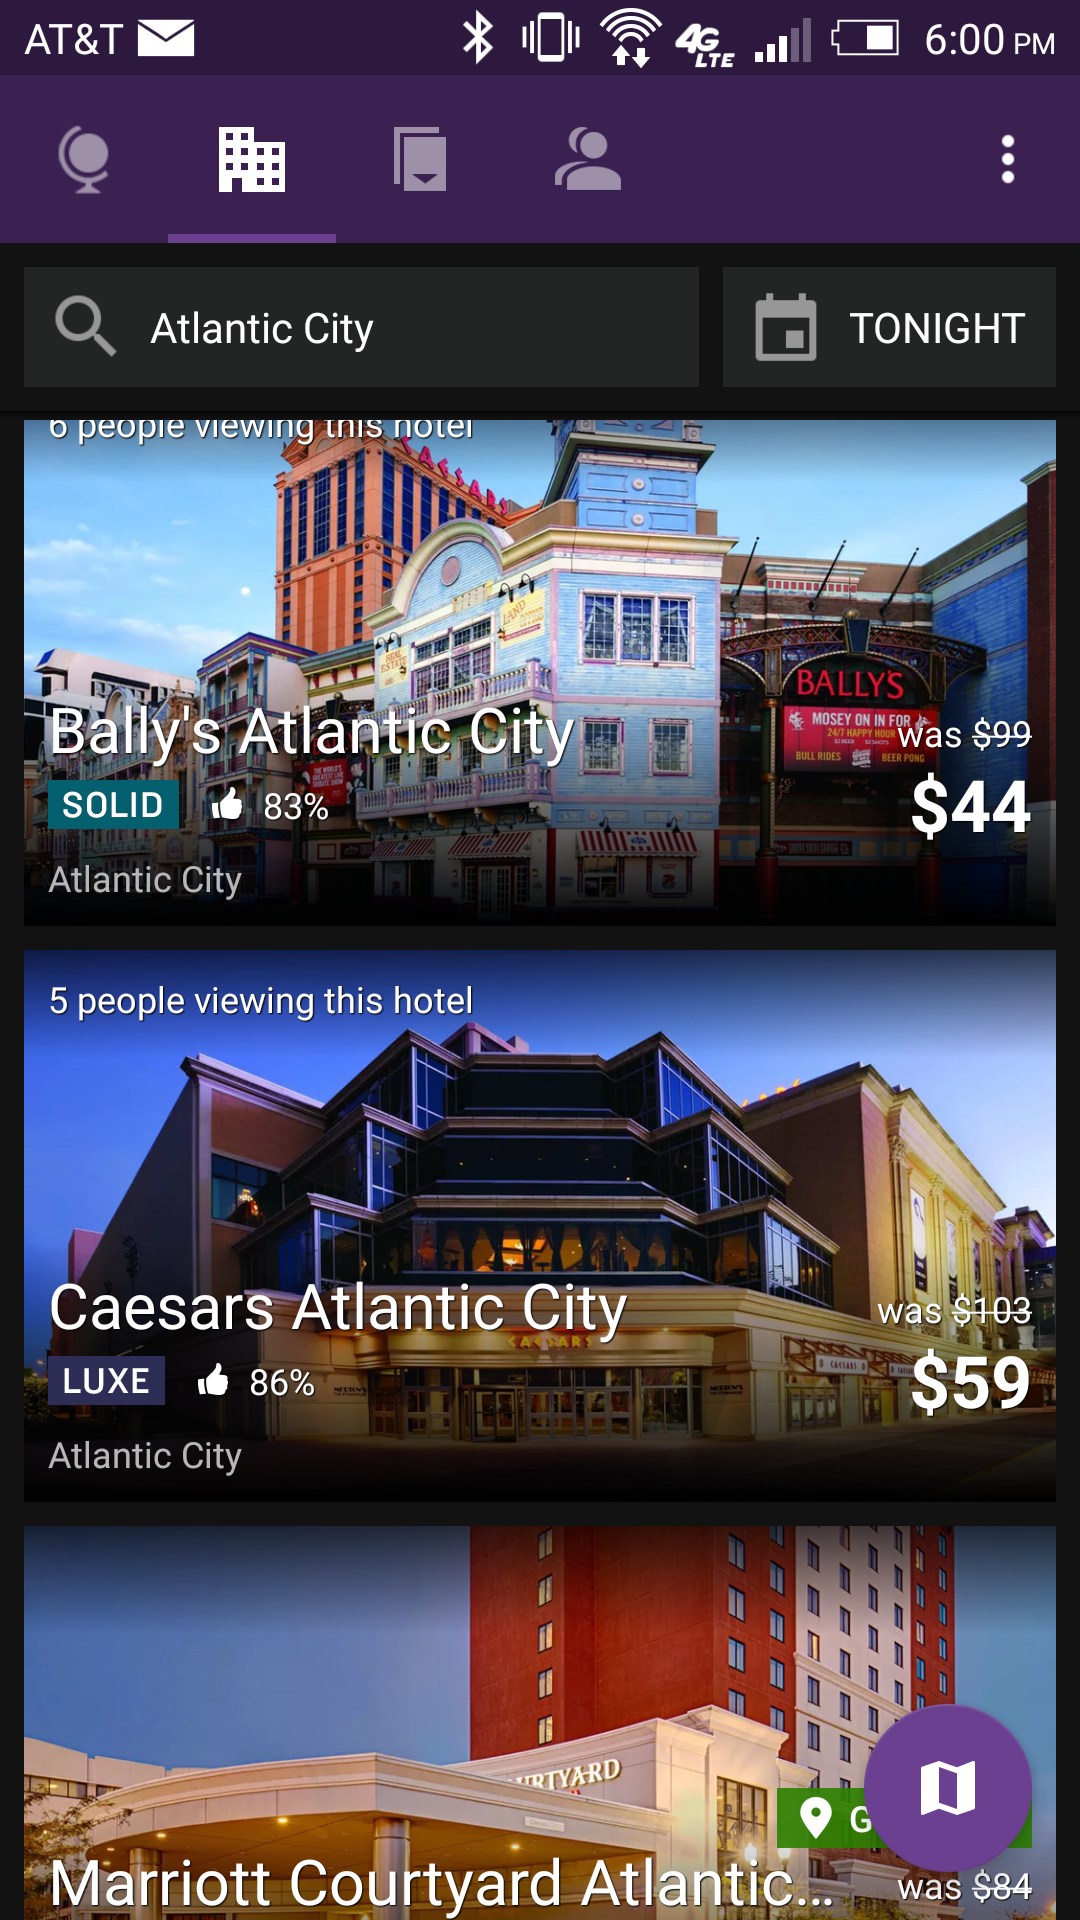 finding the best rates on atlantic city hotel rooms (without comps